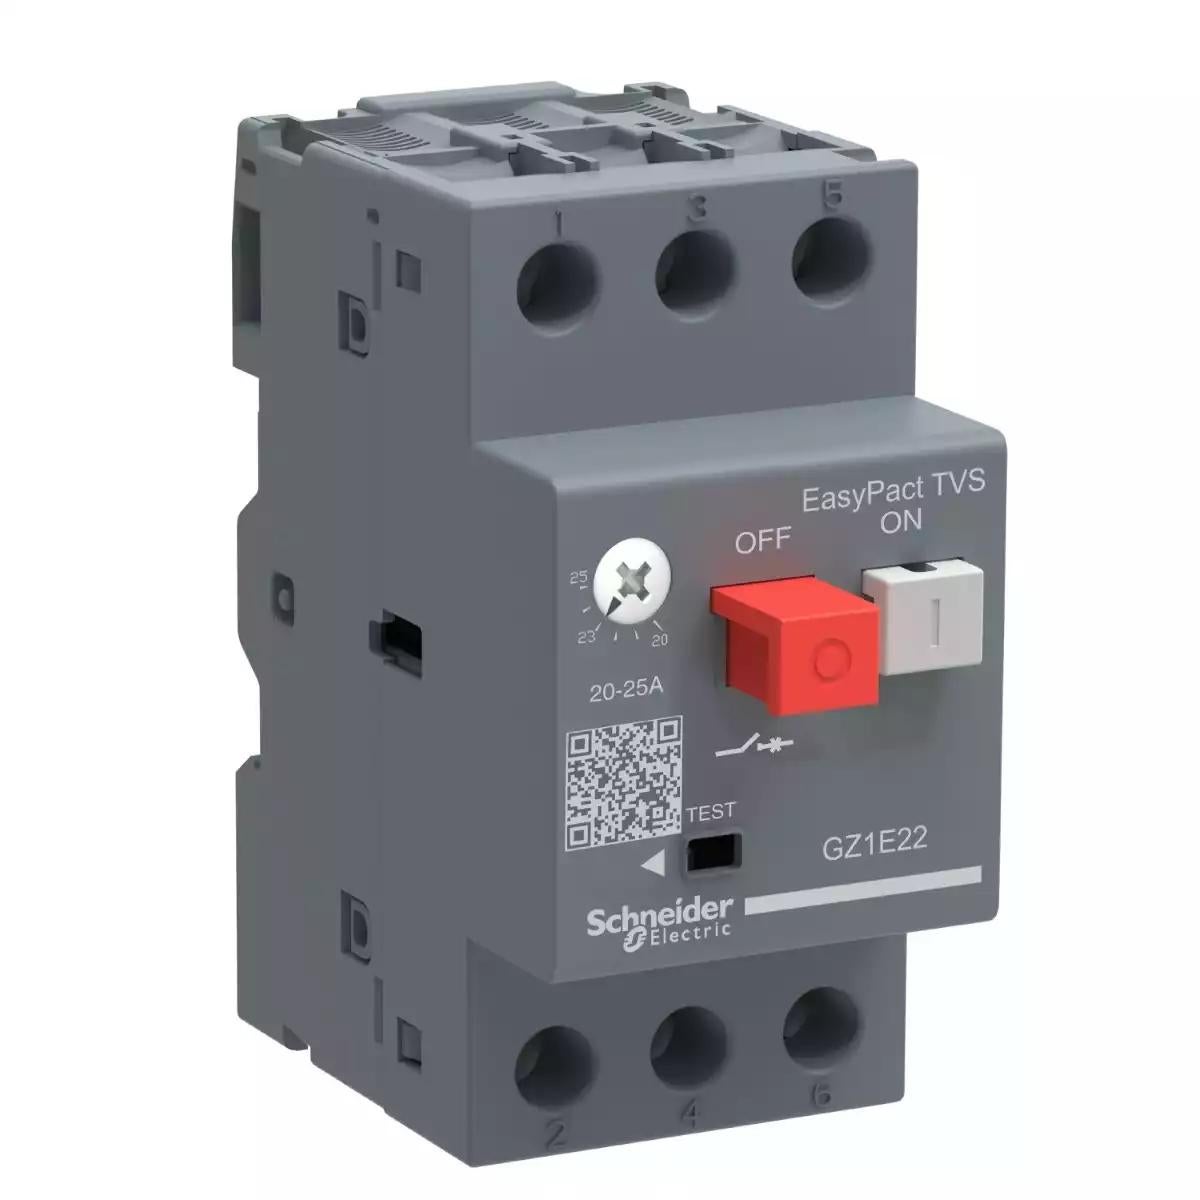 Motor circuit breaker, EasyPact, TVS GZ1E, AC-3, 3P, 4..6.3A, thermal magnetic detection